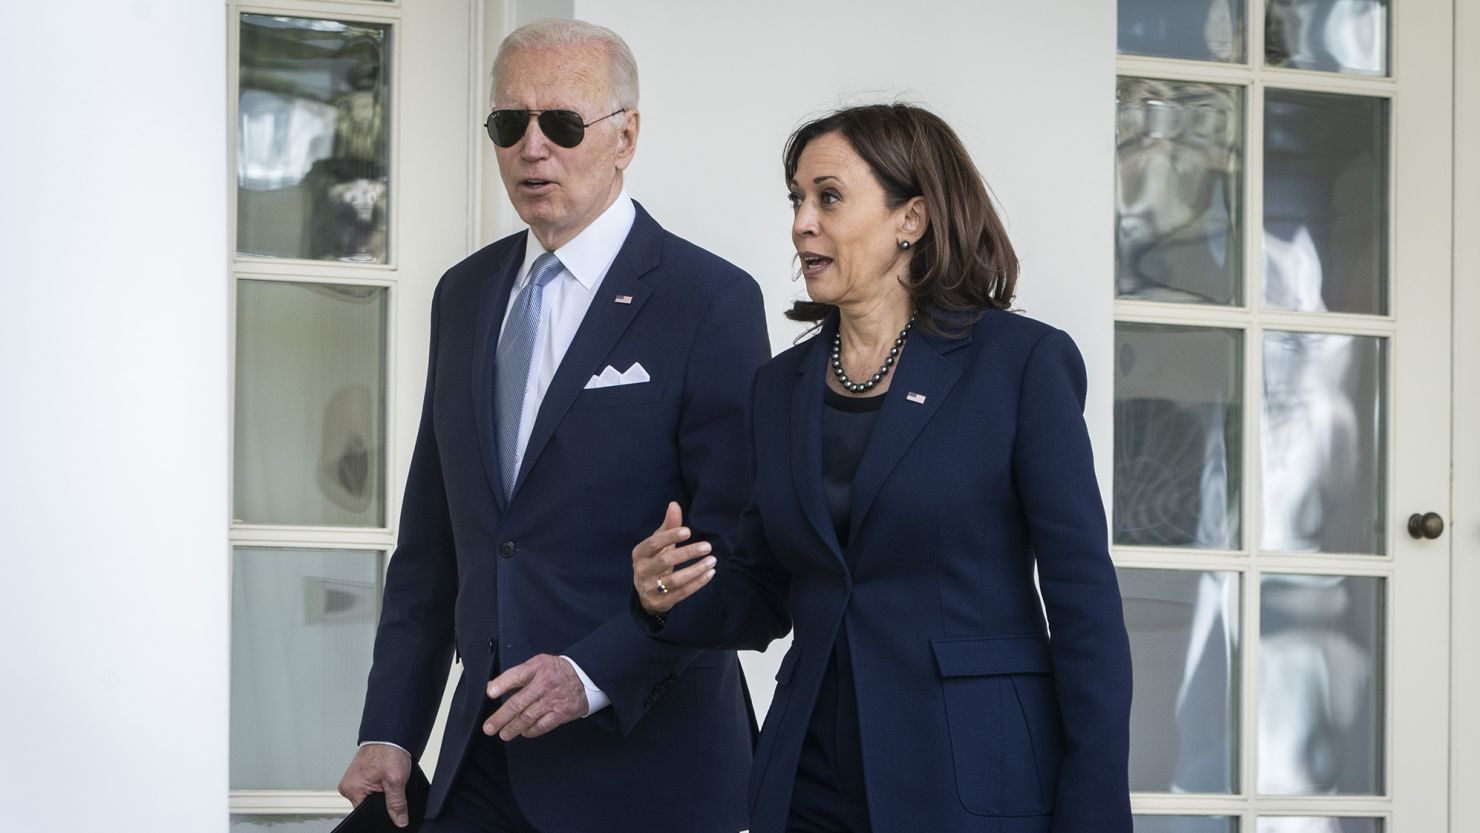 WASHINGTON, DC - APRIL 11: (L-R) U.S. President Joe Biden and Vice President Kamala Harris walk back to the Oval Office after an event about gun violence in the Rose Garden of the White House April 11, 2022 in Washington, DC. Biden announced a new firearm regulation aimed at reining in ghost guns, untraceable, unregulated weapons made from kids. Biden also announced Steve Dettelbach as his nominee to lead the Bureau of Alcohol, Tobacco, Firearms and Explosives (ATF). (Photo by Drew Angerer/Getty Images)